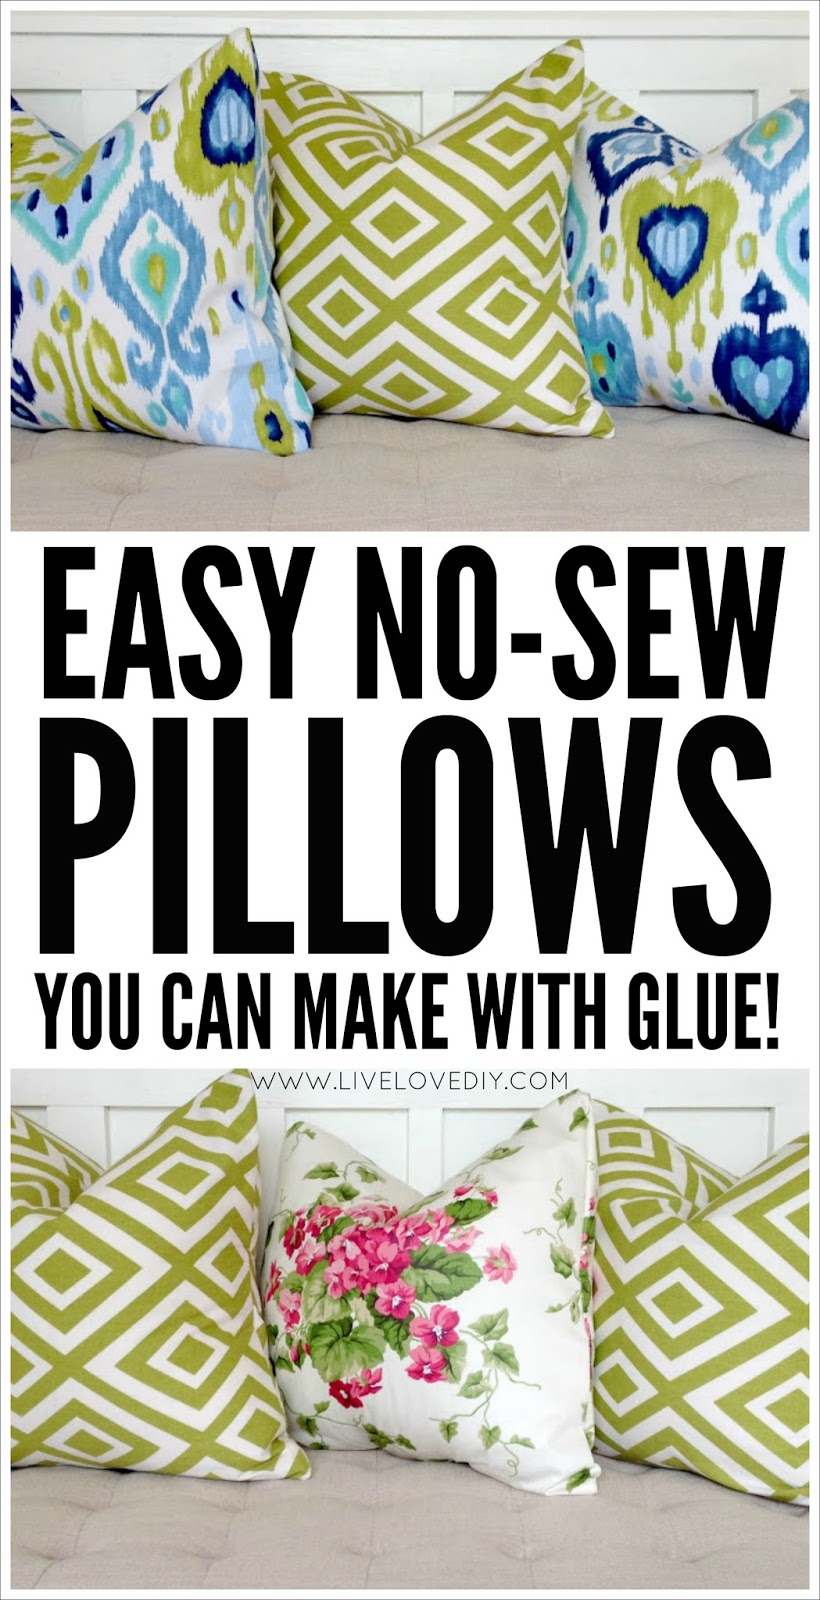 LiveLoveDIY: How To Make A Pillow With Glue